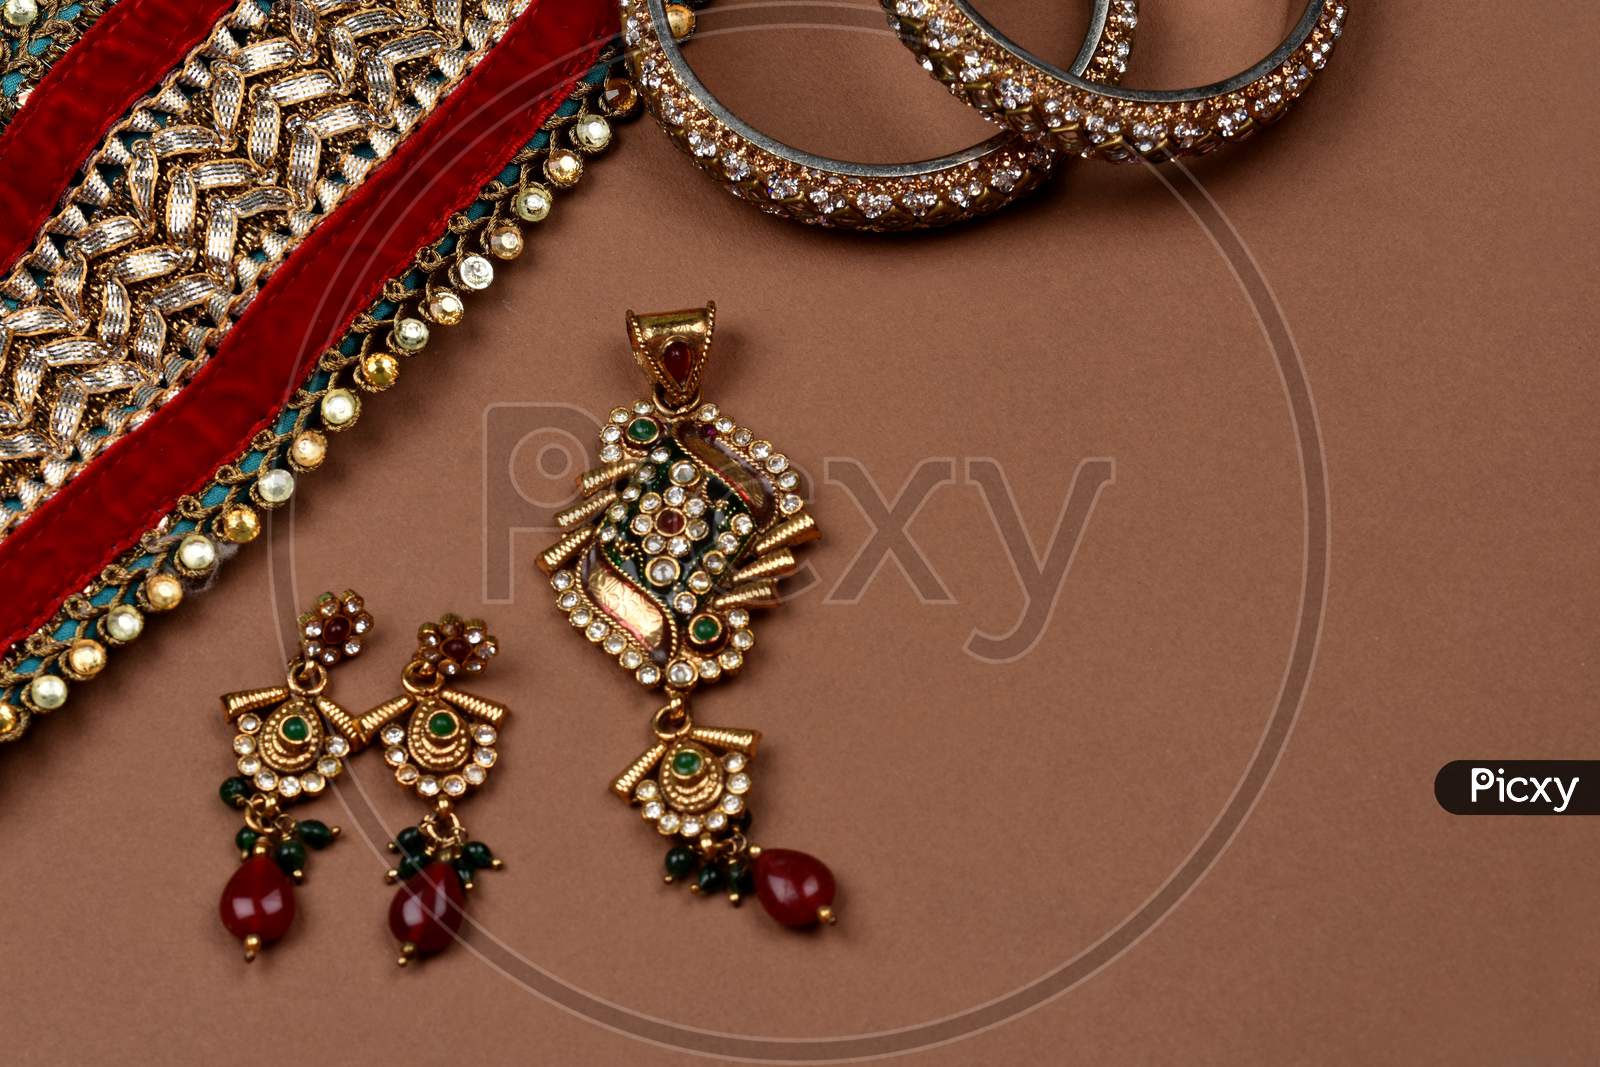 Antique Jewellery On A Brown Background, Golden Scarf, Gold Bracelet,Jewelry Background, Gold Necklace, Gold Earrings, Finger Ring.Style, Fashion And Design Of Jewelry. Indian Traditional Jewellery